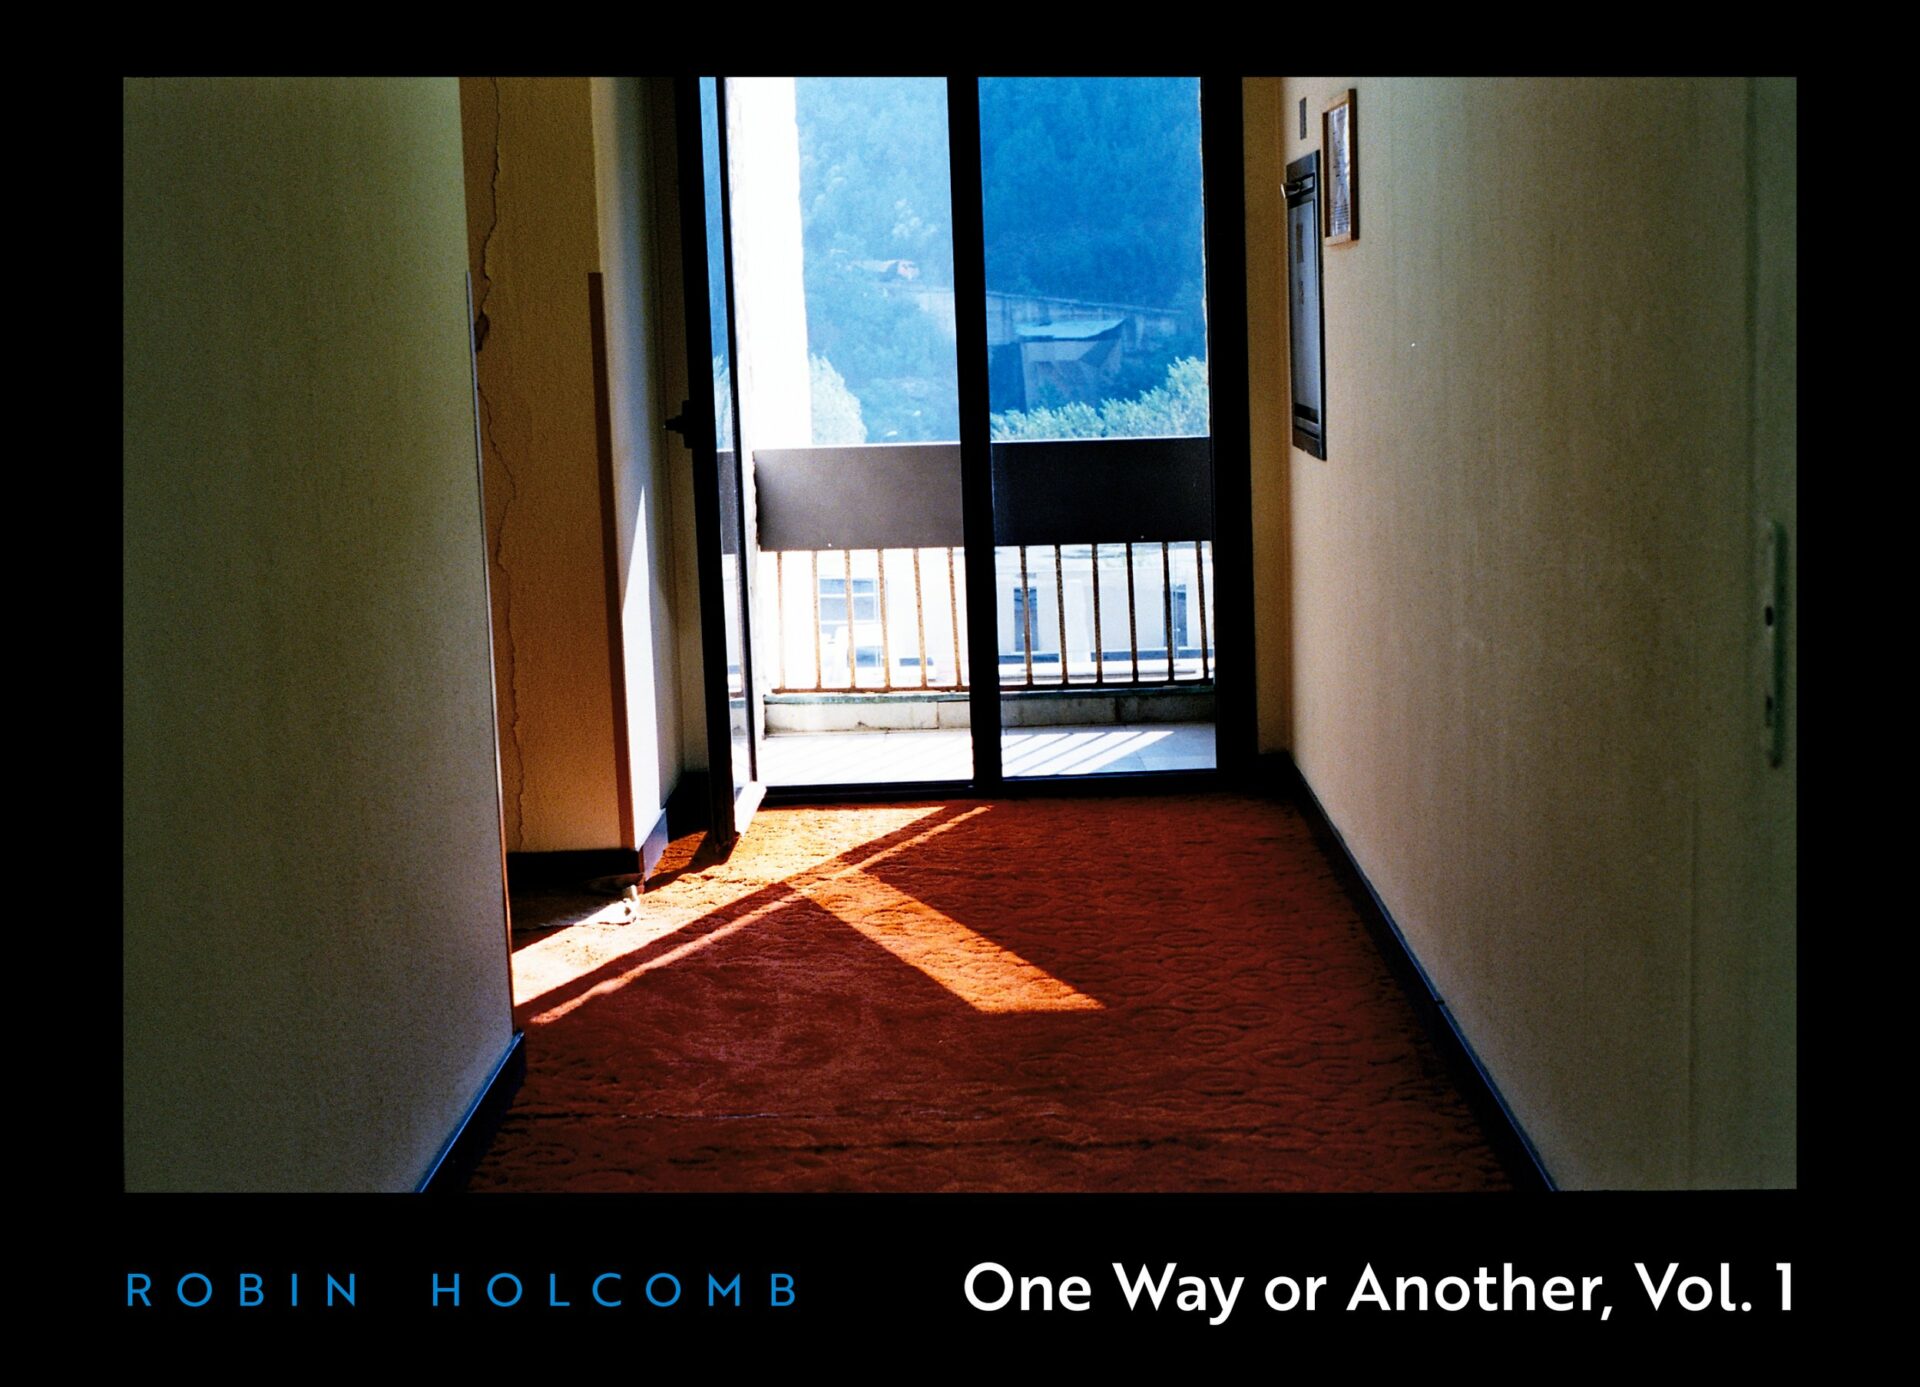 Robin Holcomb: One Way or Another, Vol. 1